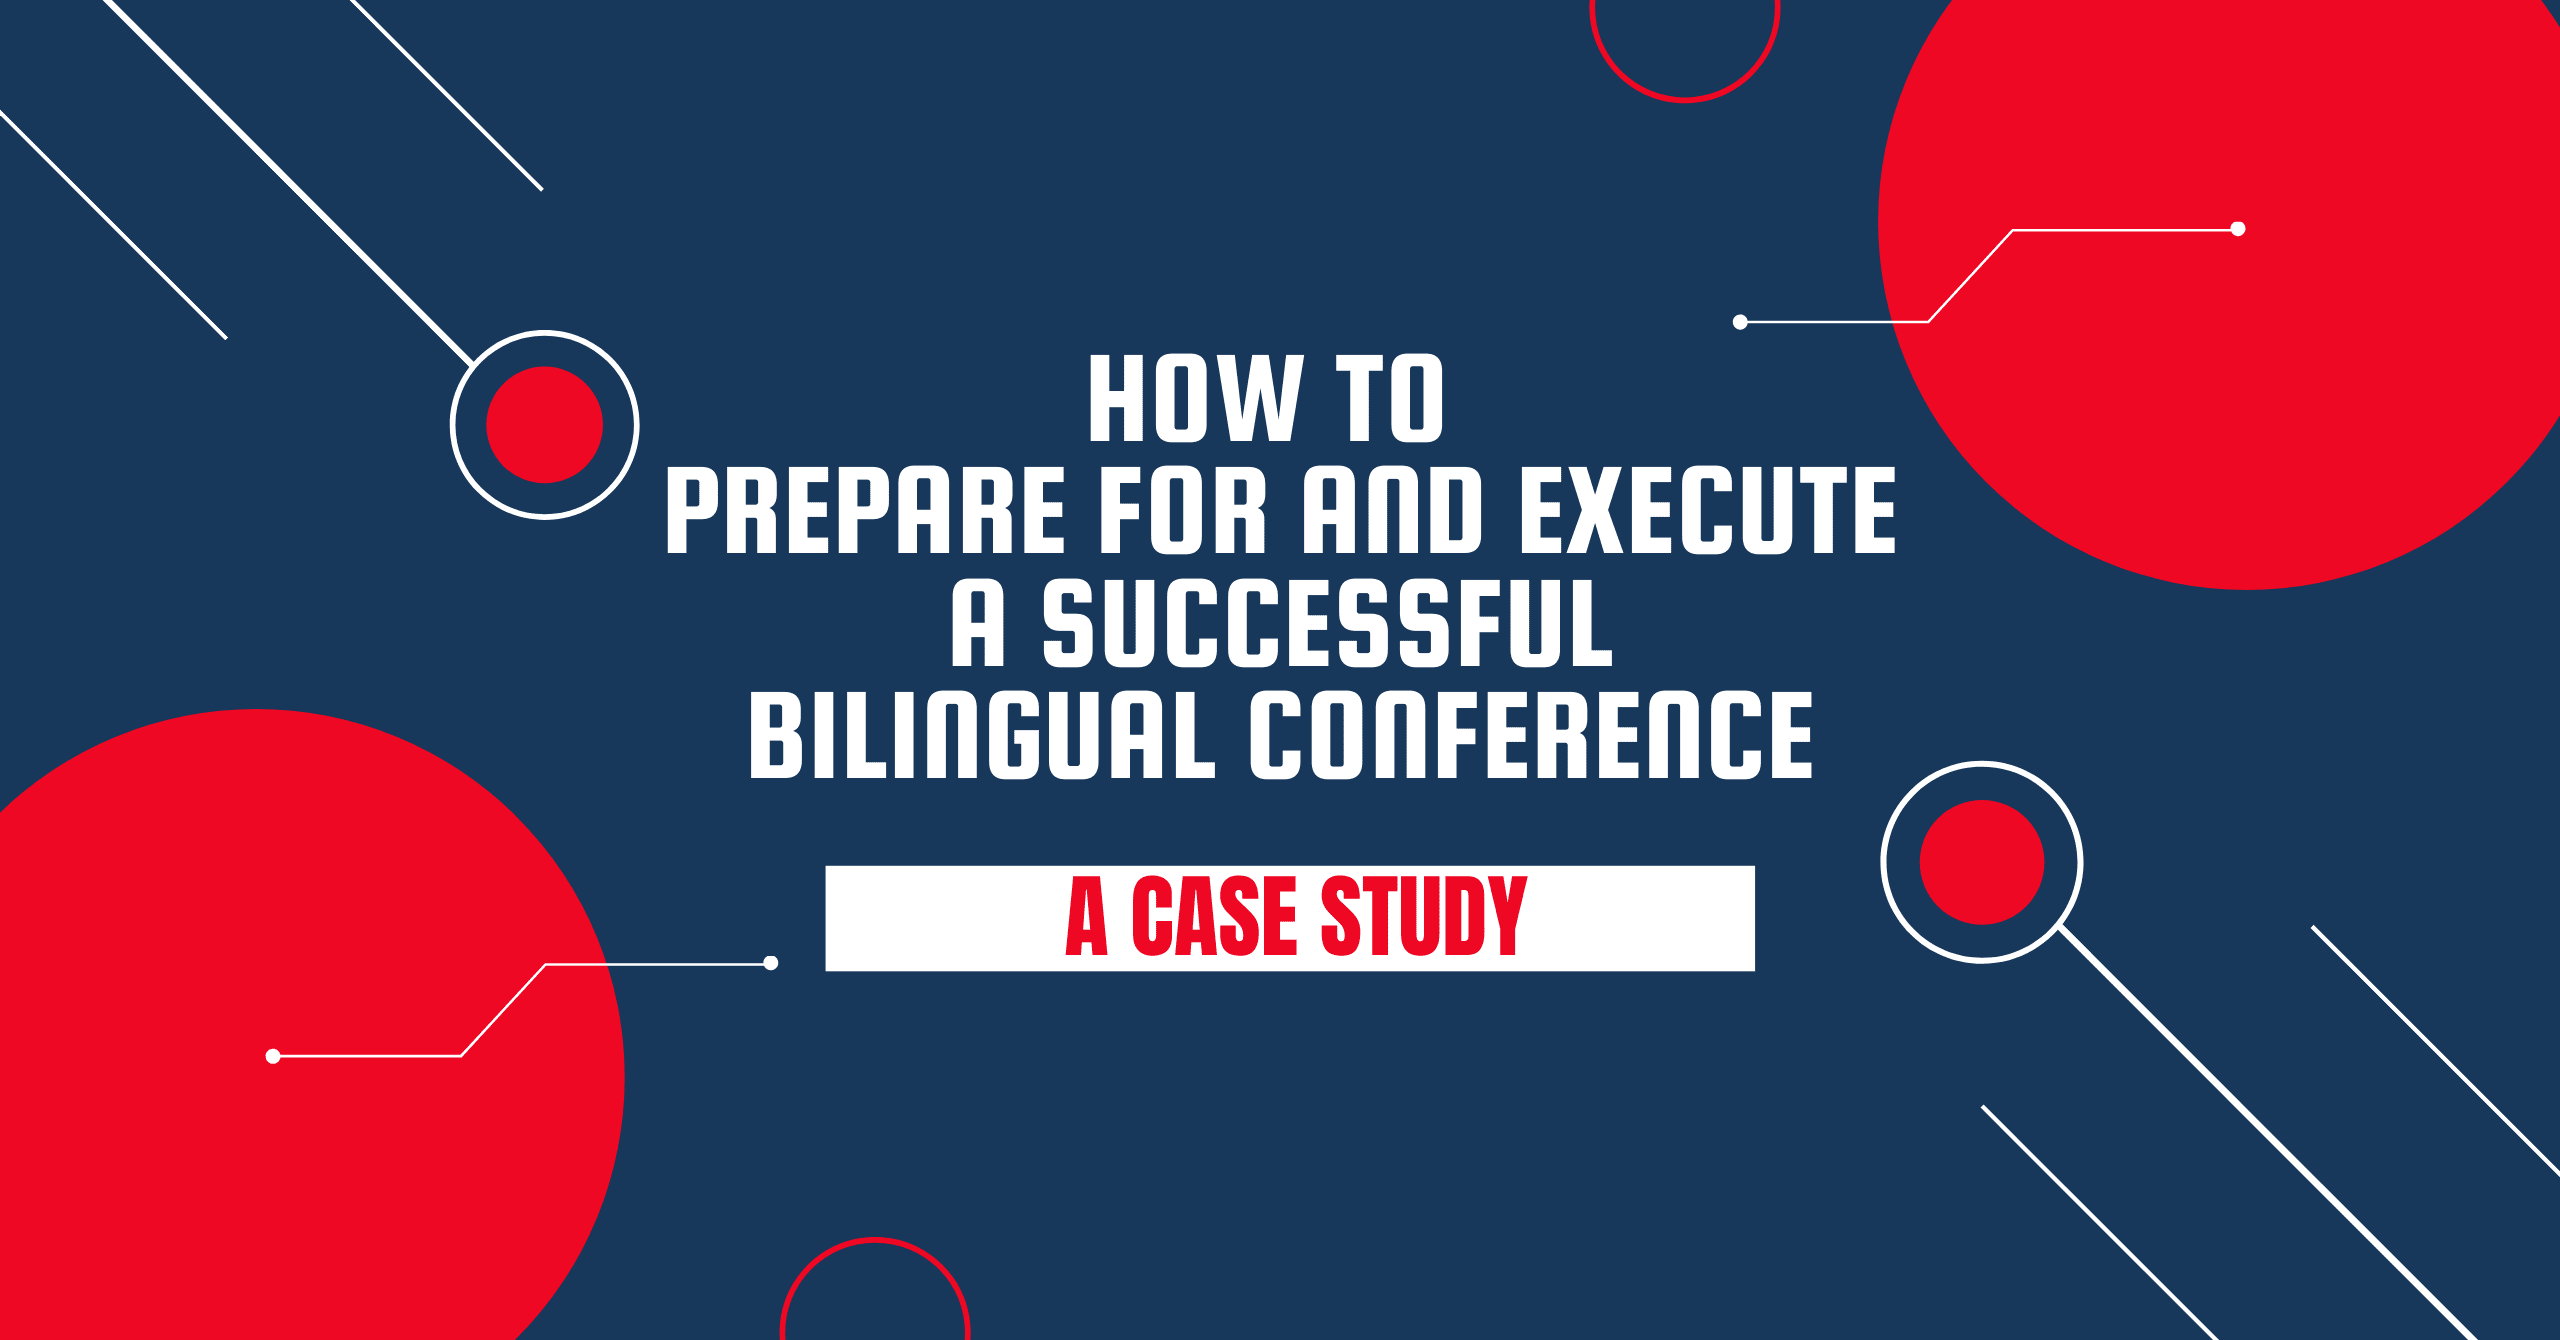 How to Prepare for and Execute a Bilingual Conference